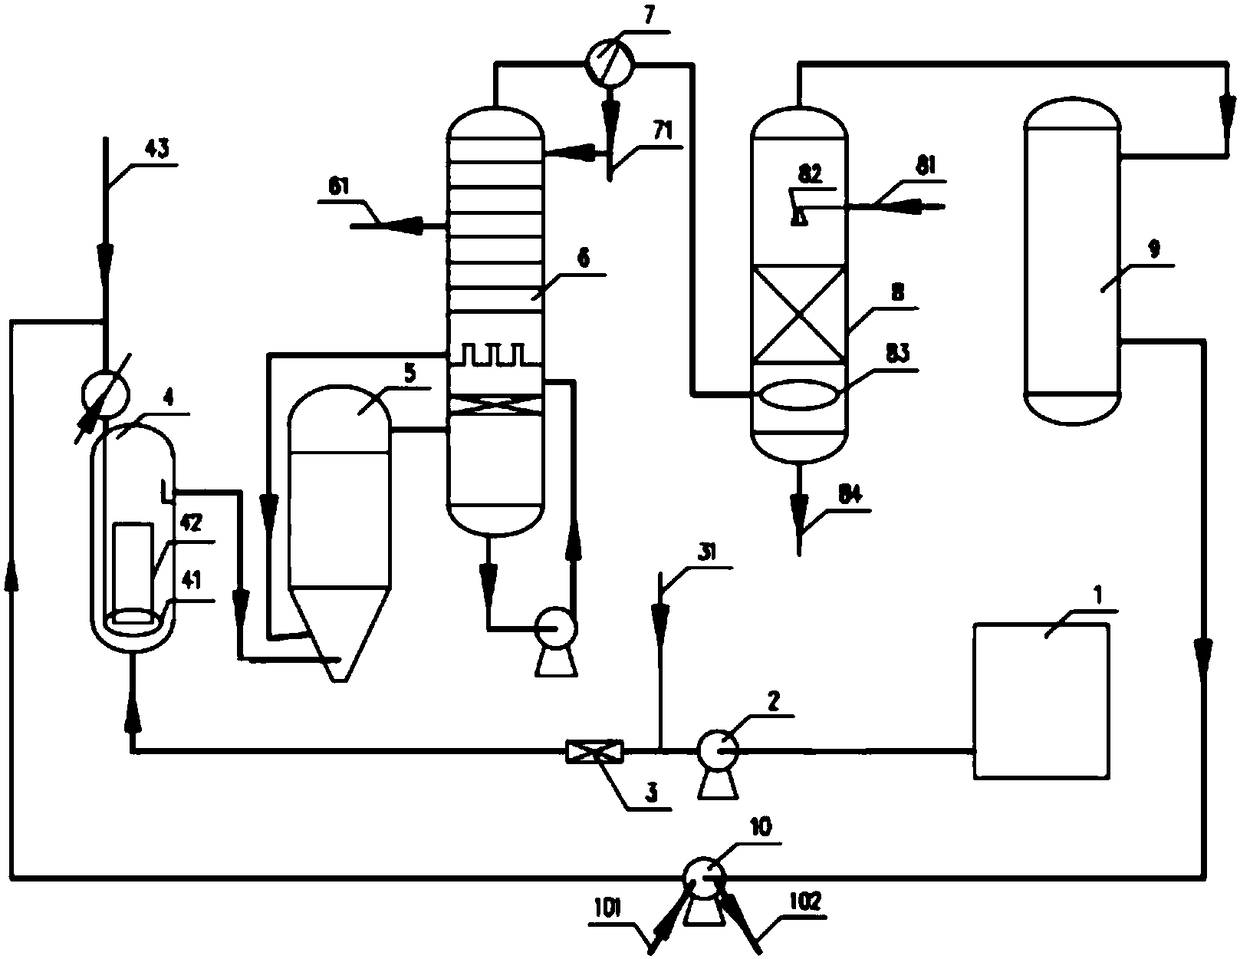 Adiponitrile production system